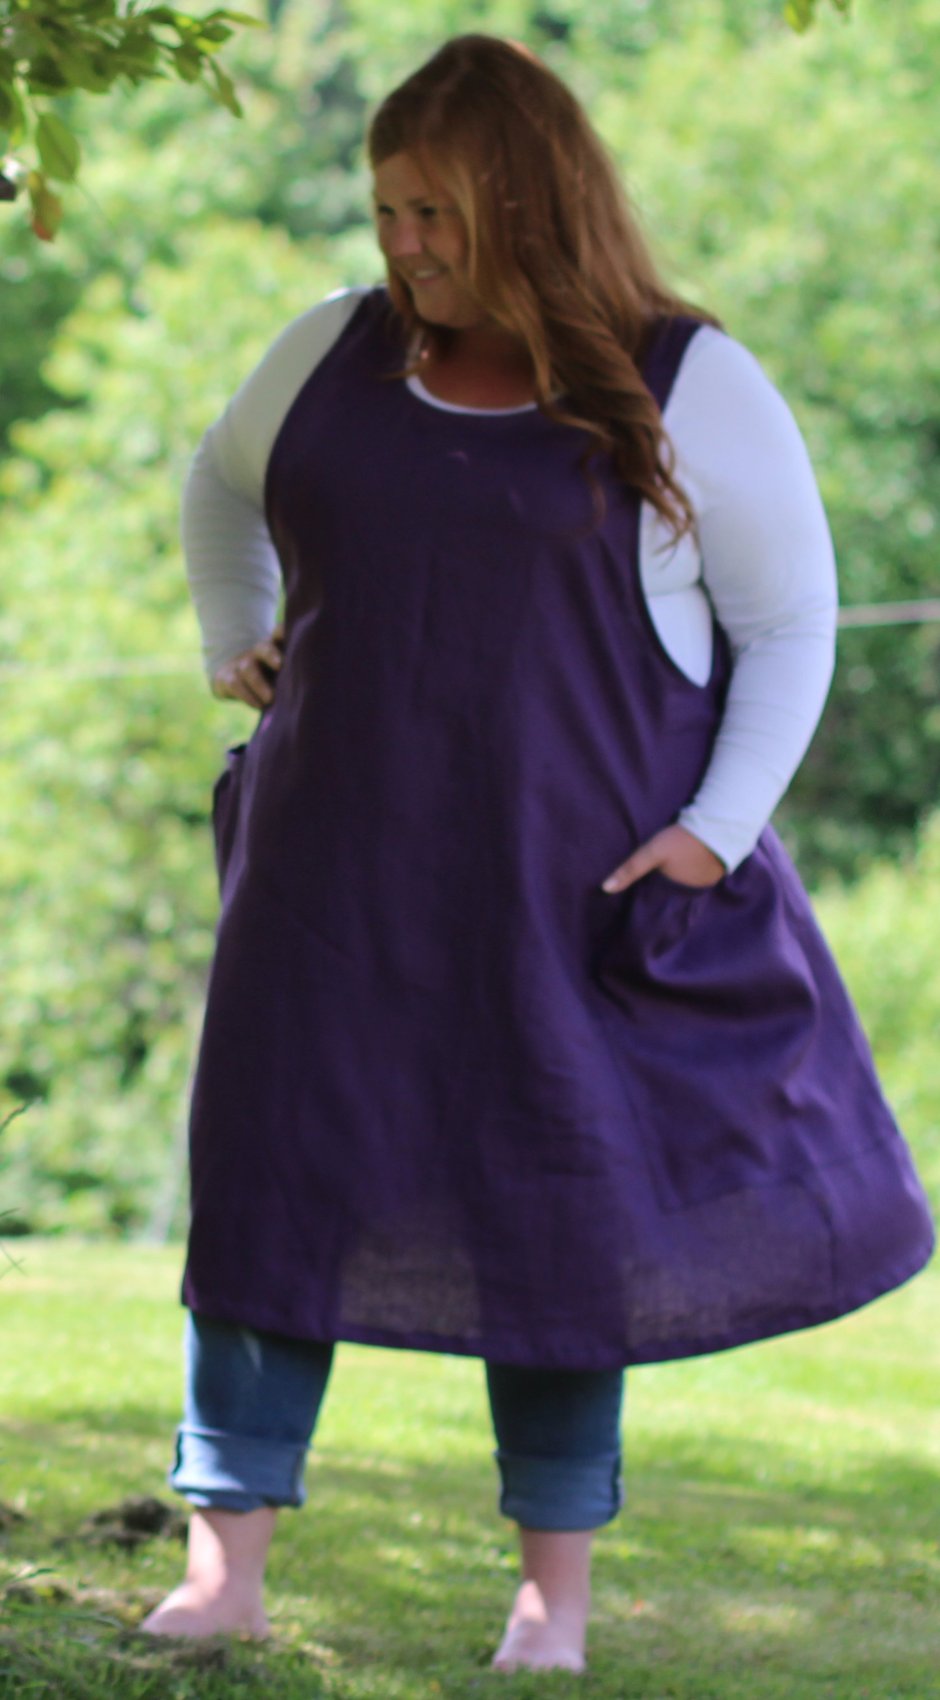 S-5X Jumper in Eggplant 100% Flax Linen, plus size, front/ side view